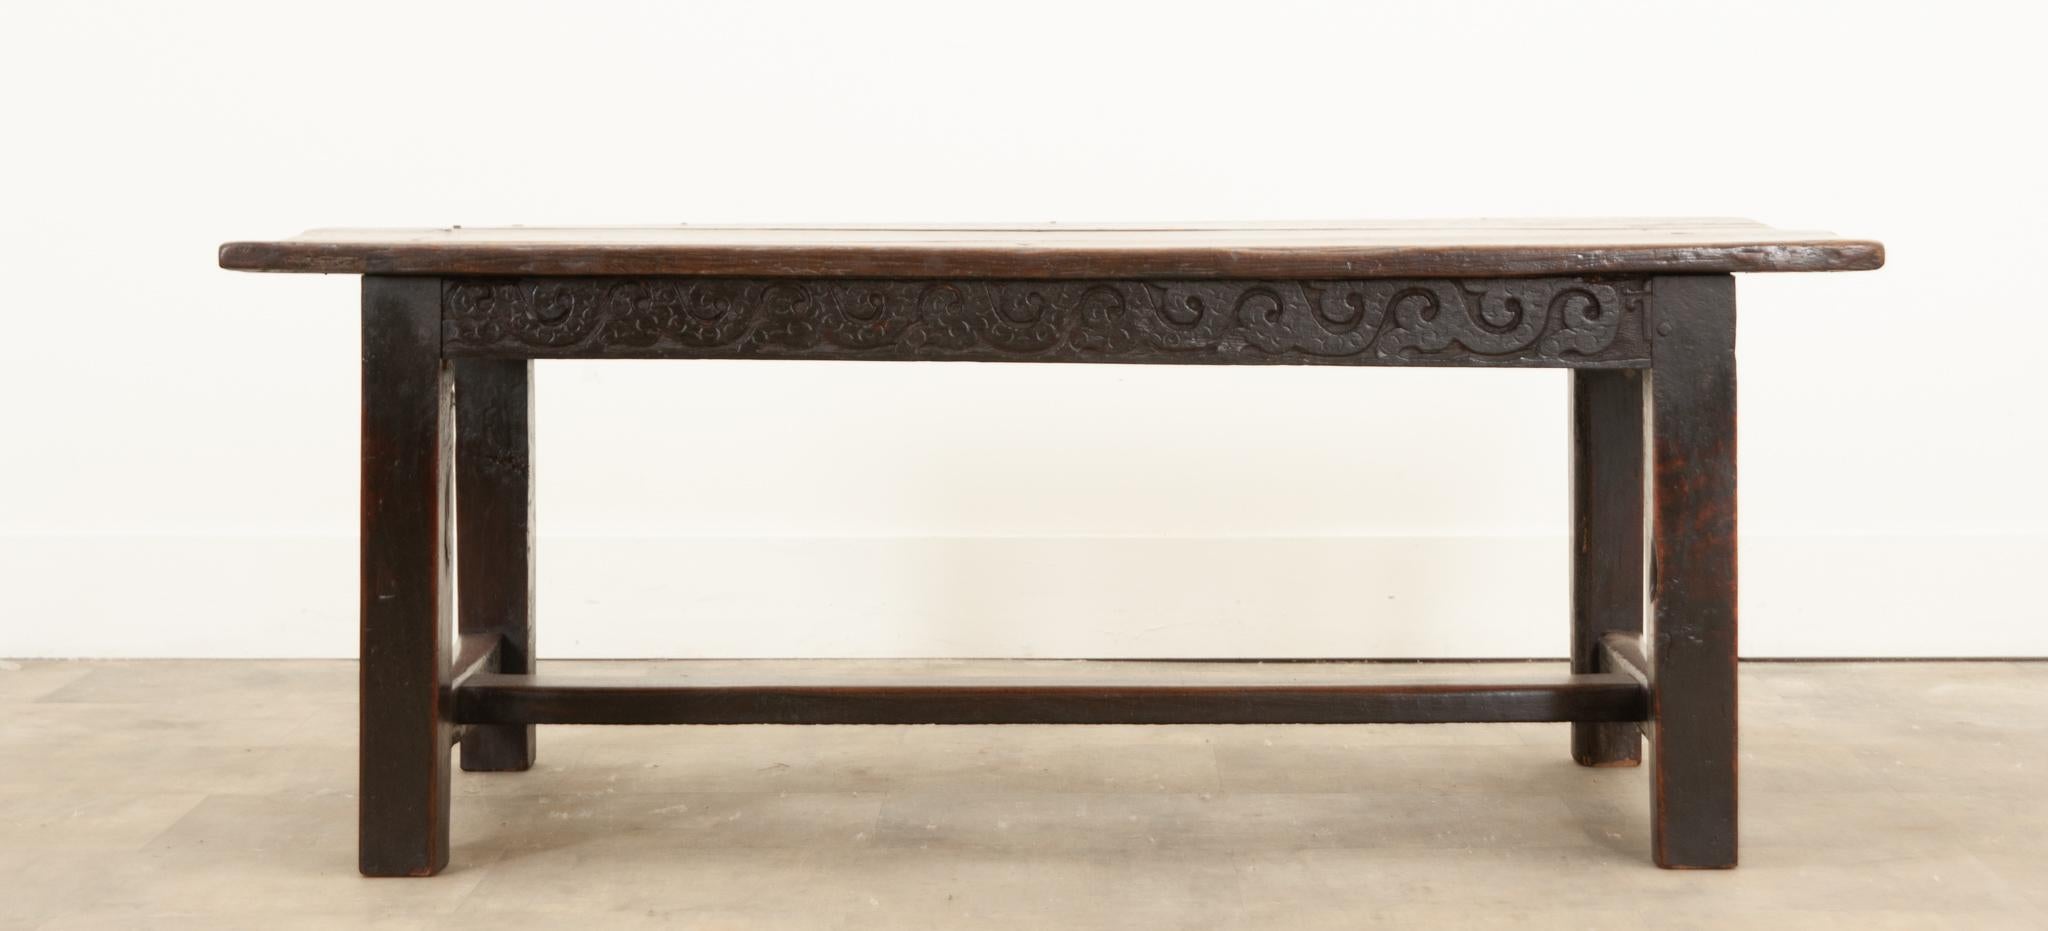 Hand-Carved English Early 18th Century Carved Oak Low Table